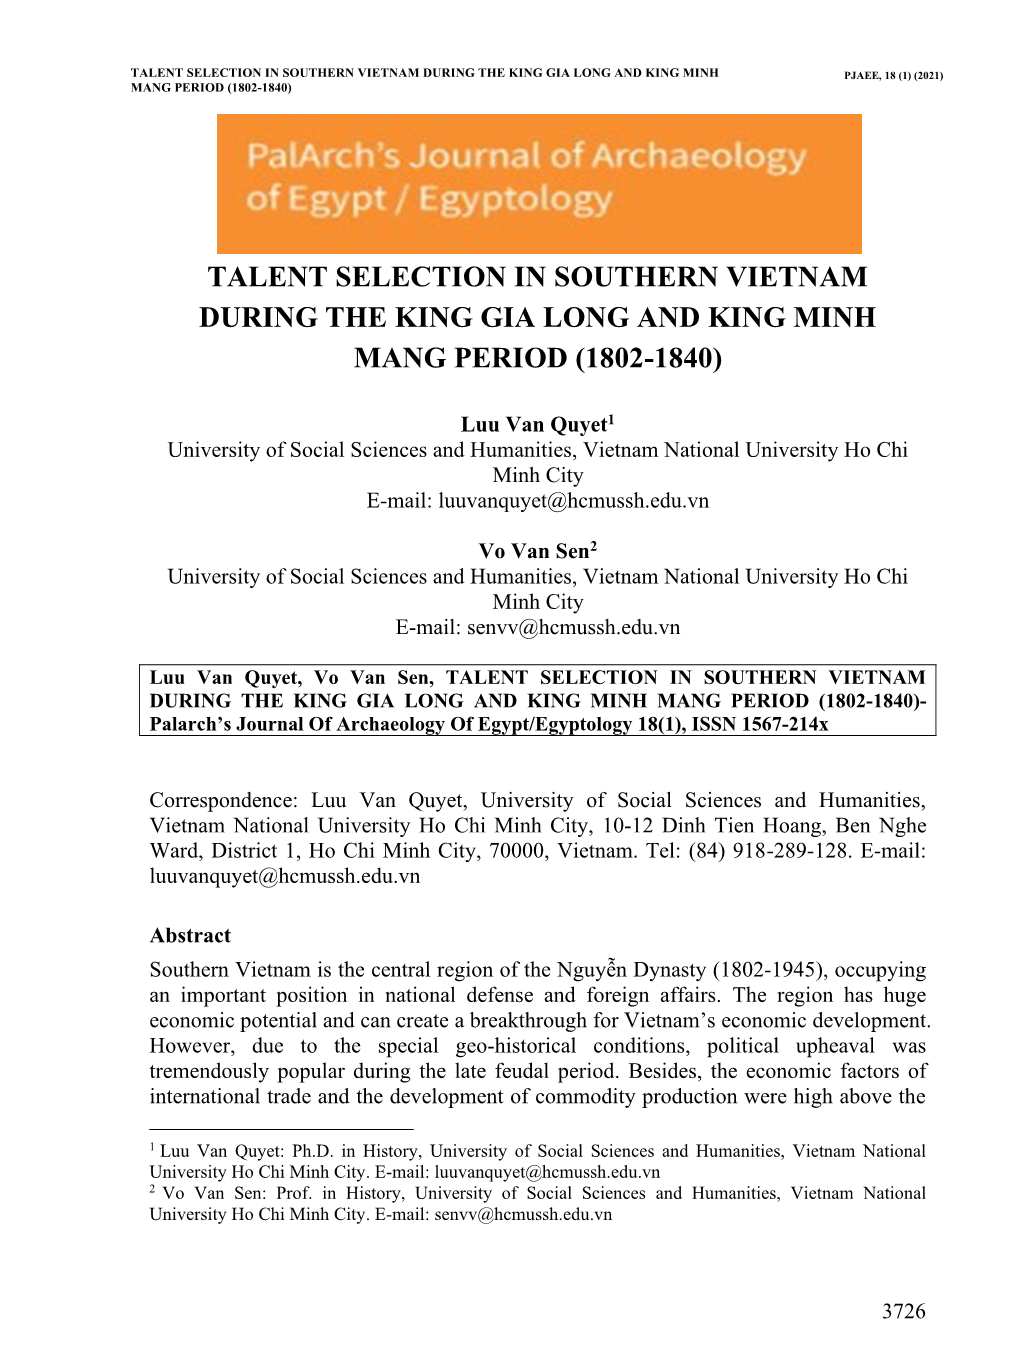 Talent Selection in Southern Vietnam During the King Gia Long and King Minh Pjaee, 18 (1) (2021) Mang Period (1802-1840)